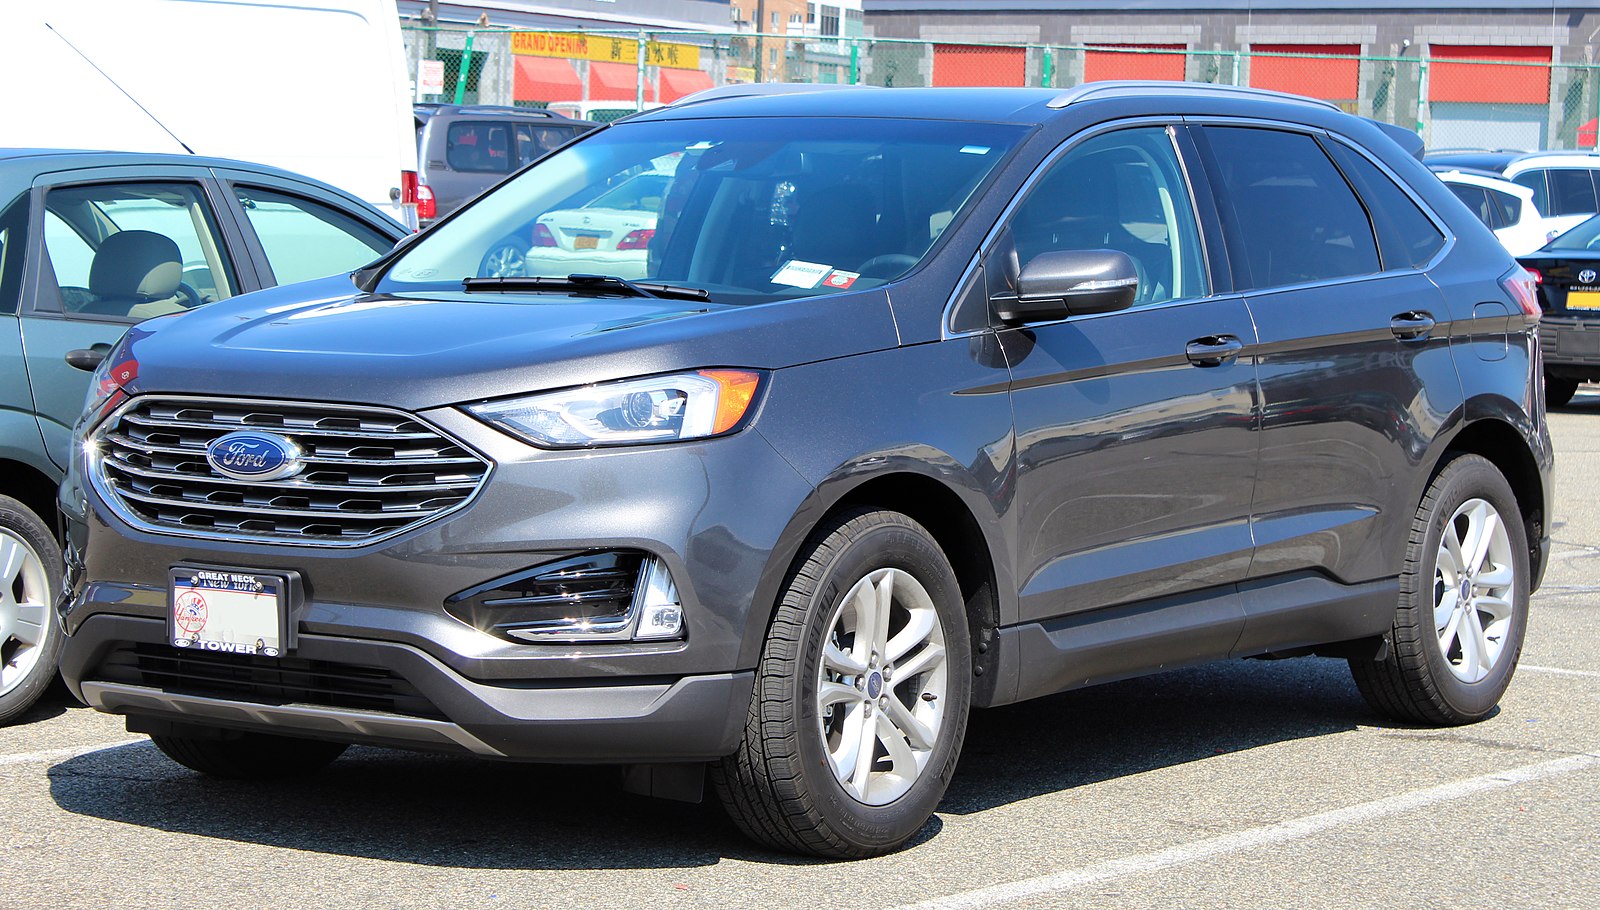 Troubleshooting the Ford Edge Engine Light